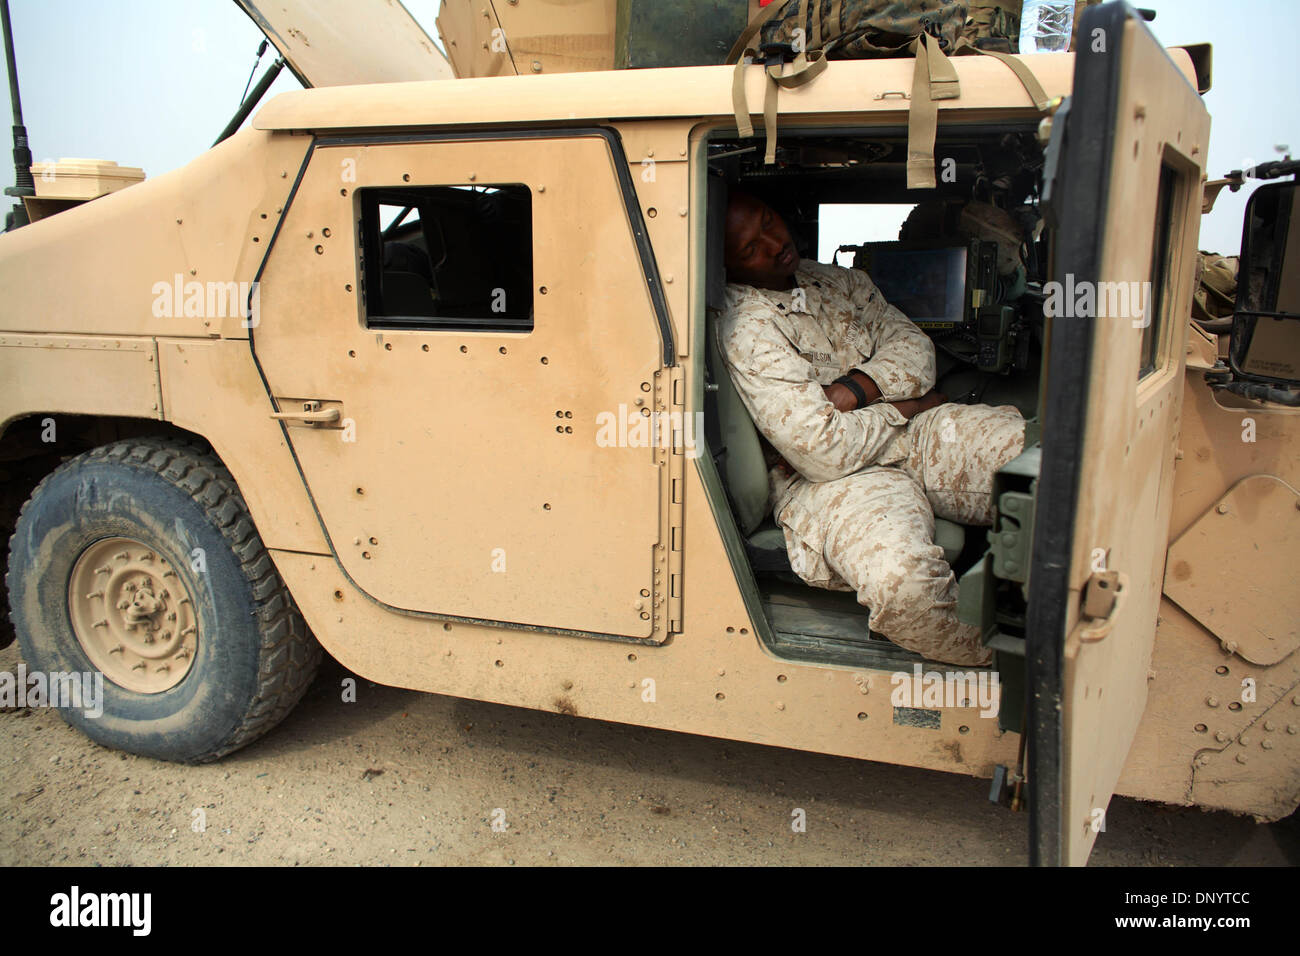 Feb 08, 2006; Al-Falujah, IRAQ; A marine from Weapons company 2nd marine division, 2nd battalion, 6th marine regiment, RCT-8, 4th platoon (callsign Black Label) takes a catnap in his HUMVEE between patrols of the Iraqi city of Al-Falujah. Mandatory Credit: Photo by Toby Morris/ZUMA Press. (©) Copyright 2006 by Toby Morris Stock Photo